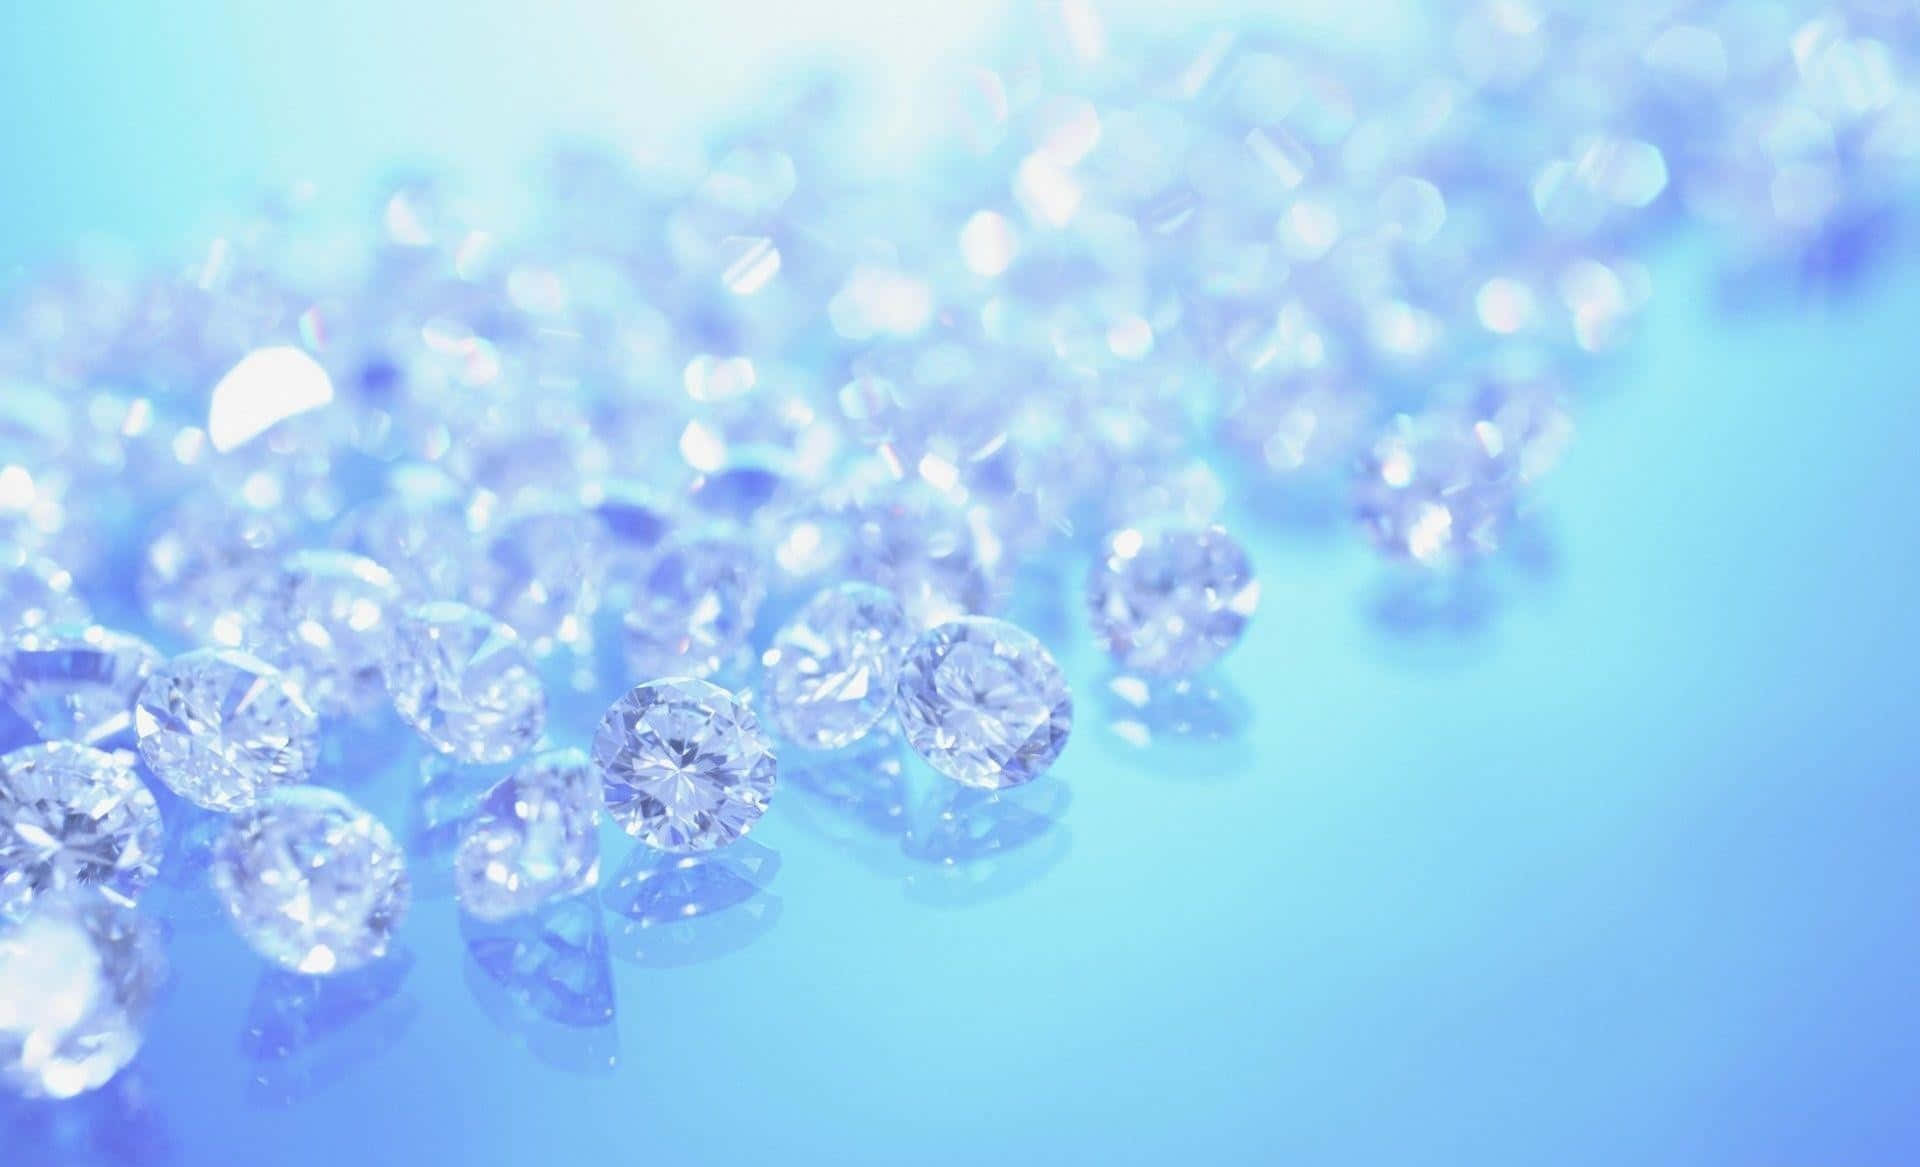 Sparkling blue diamonds with a beautiful shimmer.